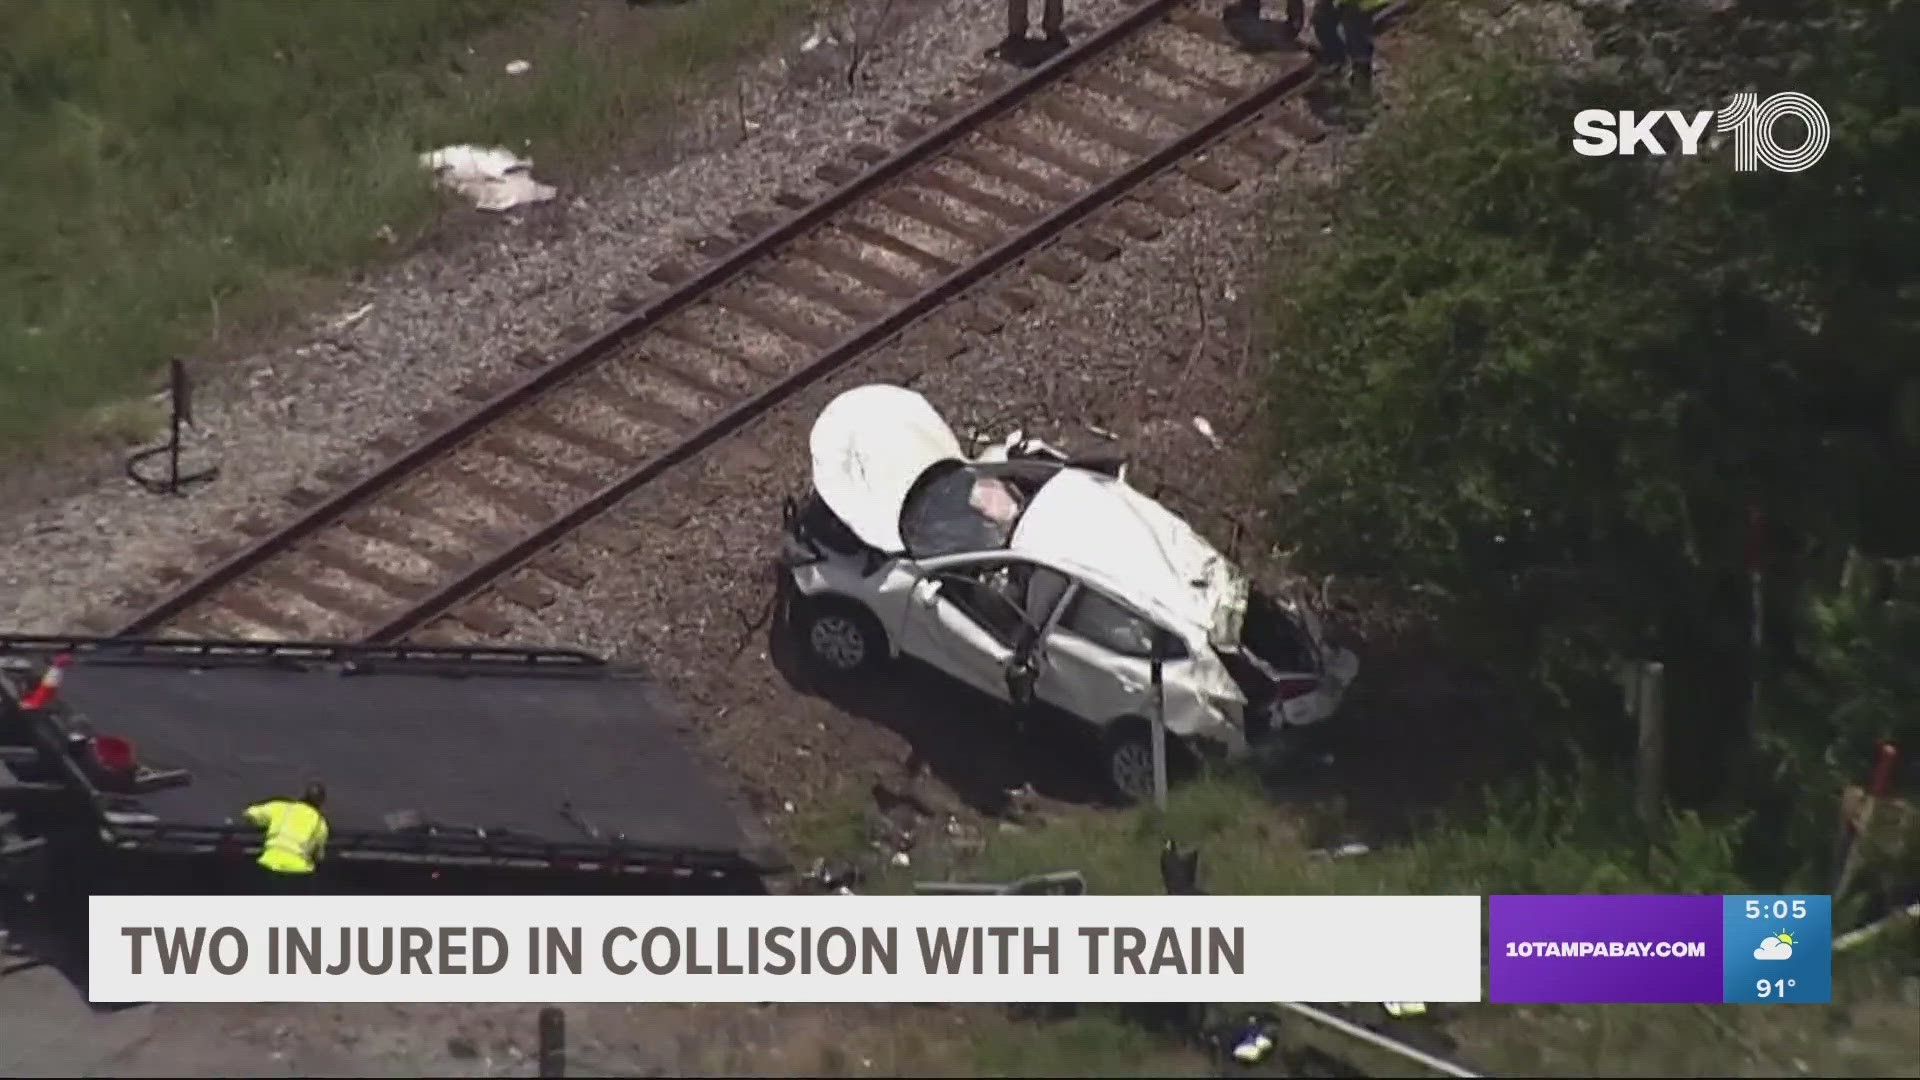 The train and SUV collided at East Broadway Avenue and East Tampa Boulevard in Tampa shortly after 1 p.m., authorities said.